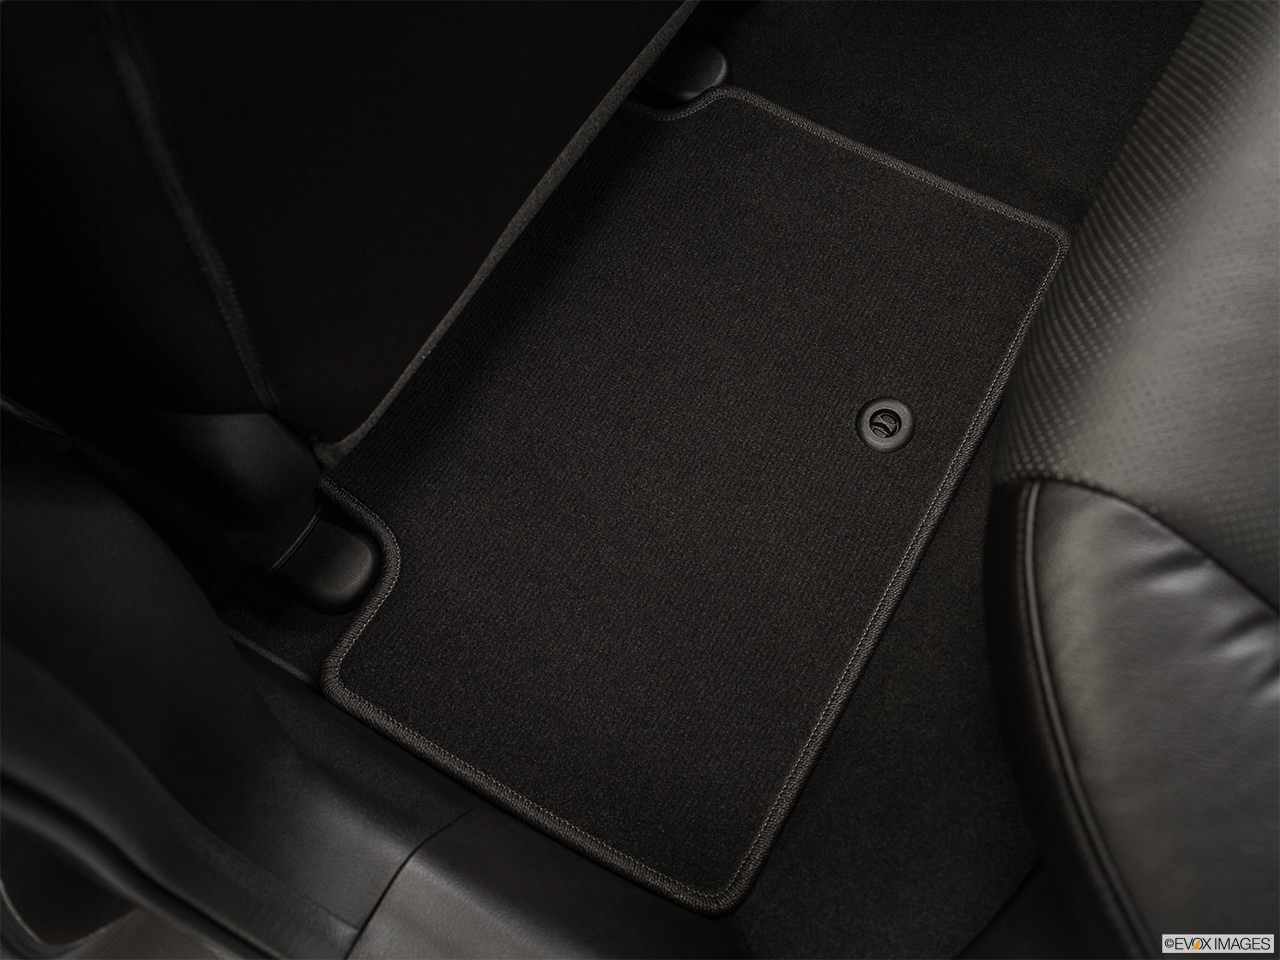 2015 Acura ILX 5-Speed Automatic Rear driver's side floor mat. Mid-seat level from outside looking in. 